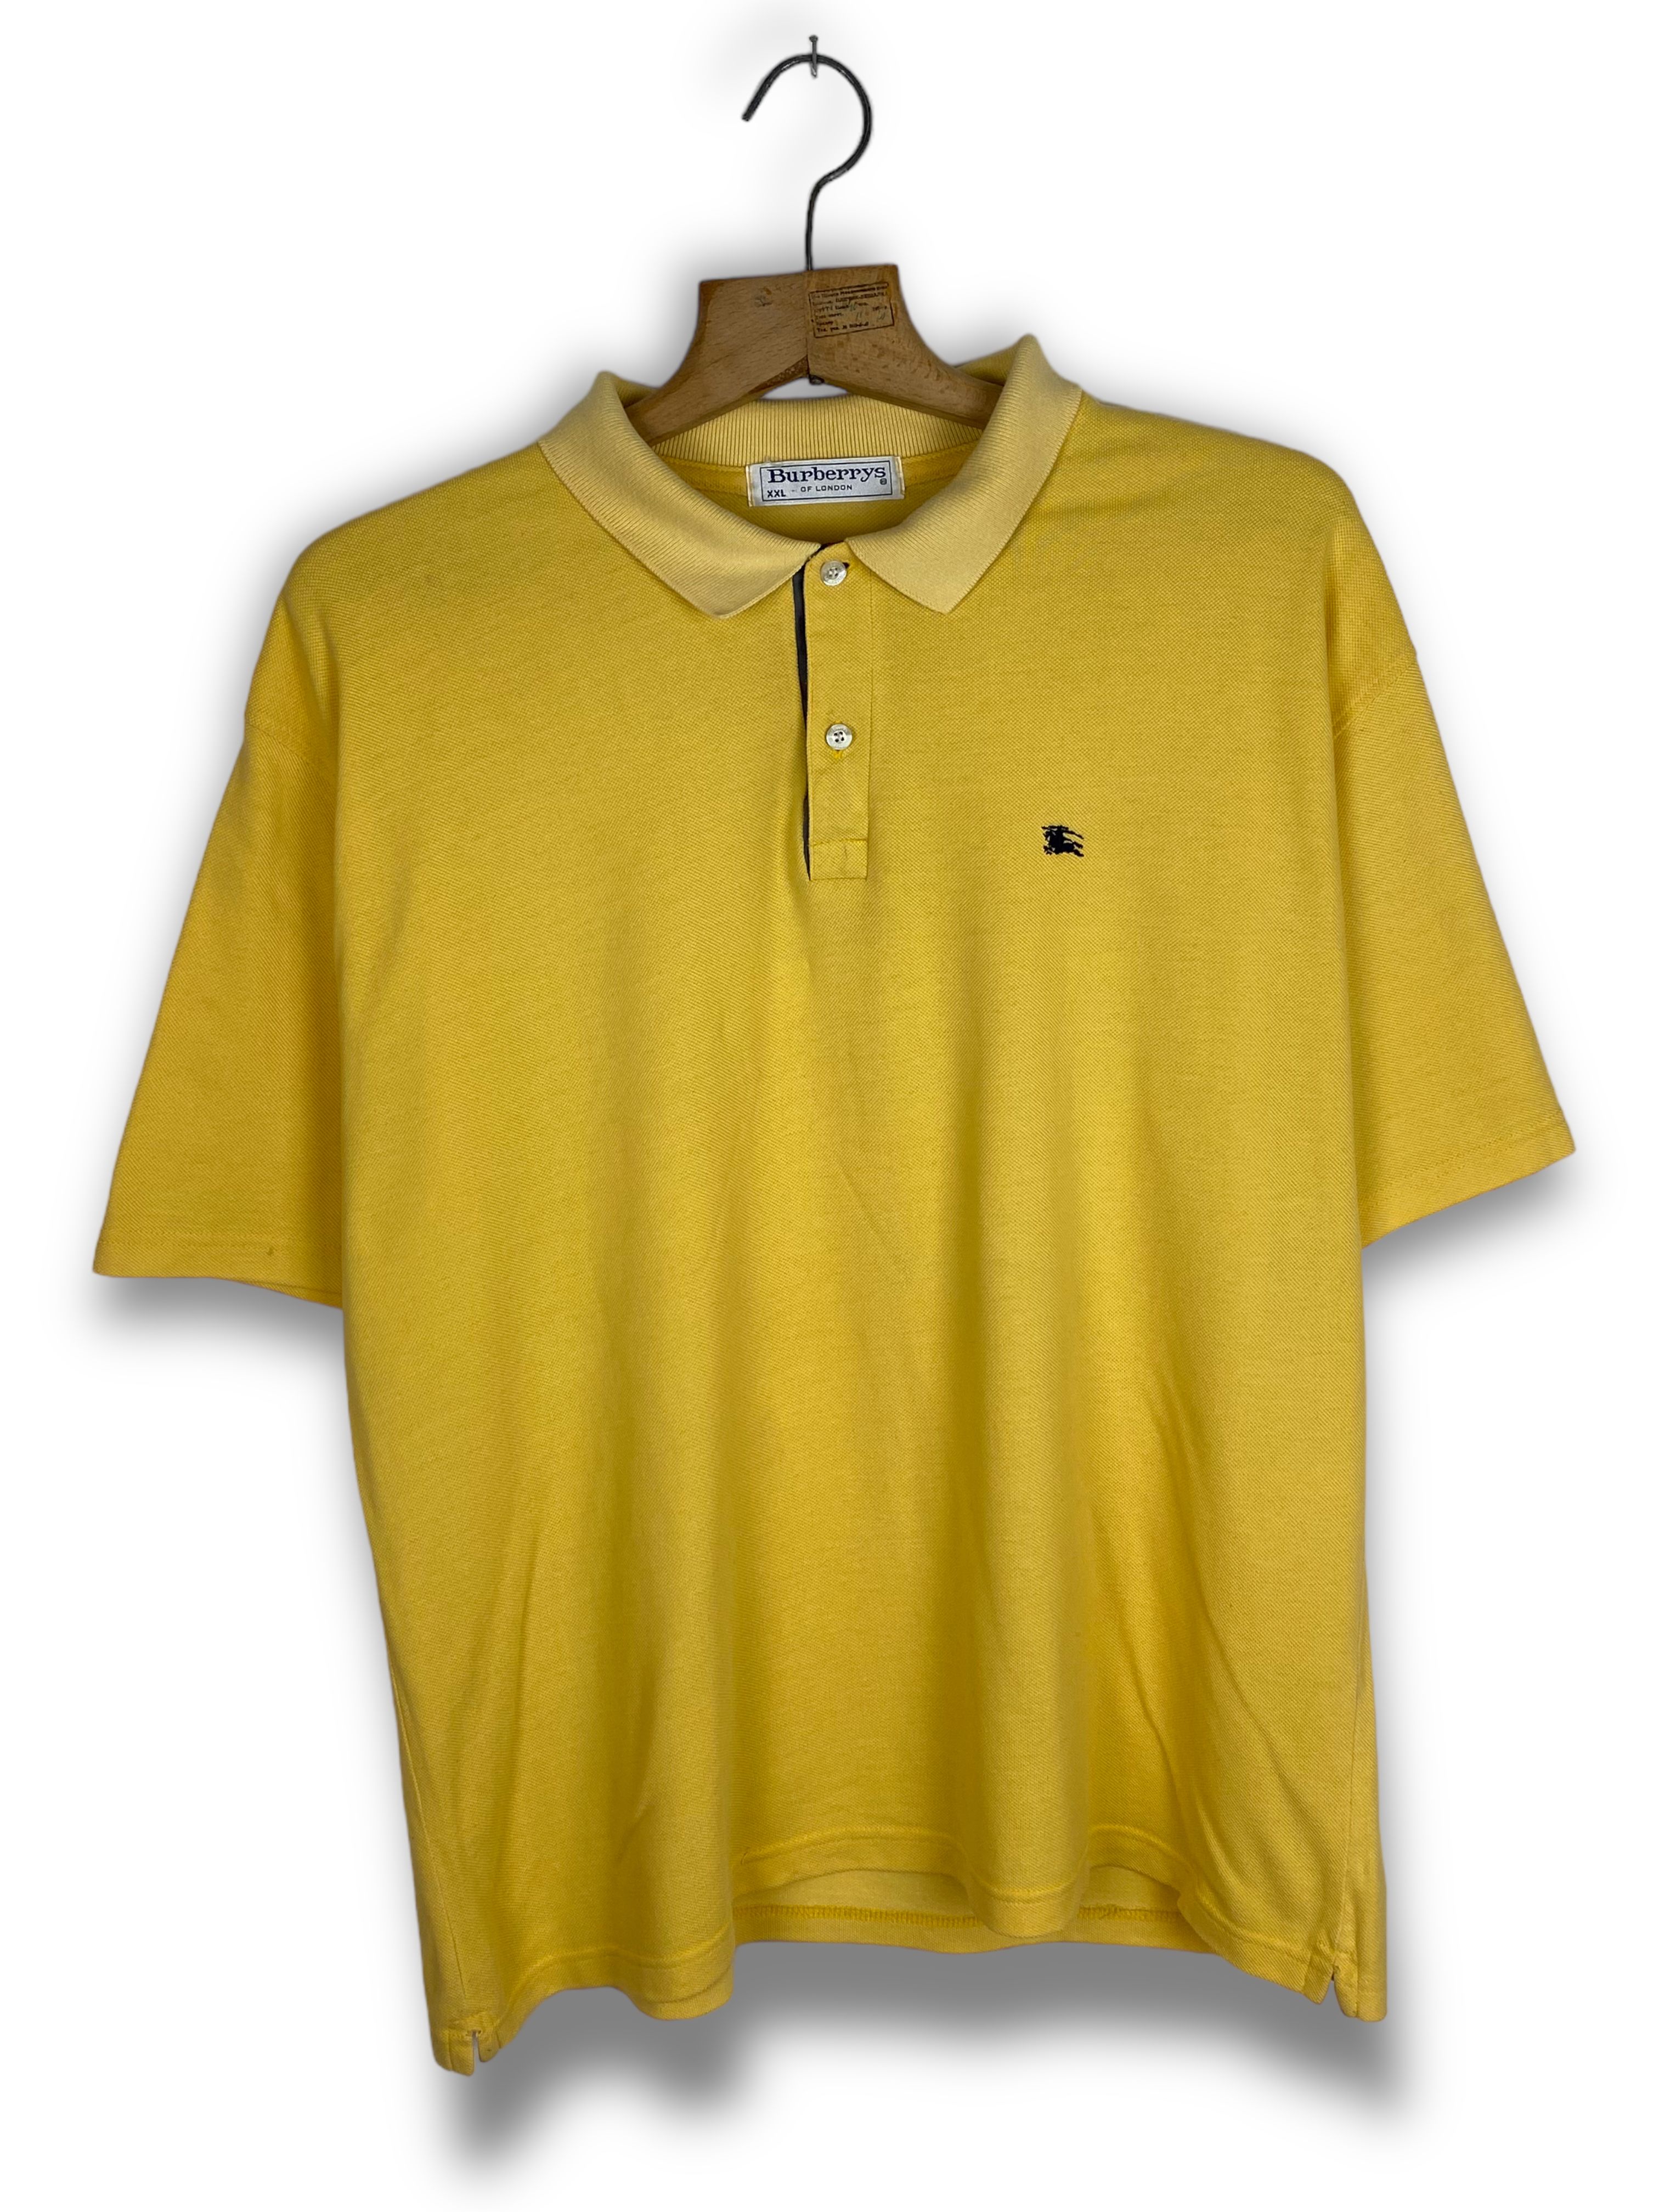 Pre-owned Burberry X Vintage 80's Vintage Burberry's Lemon Yellow Polo M522